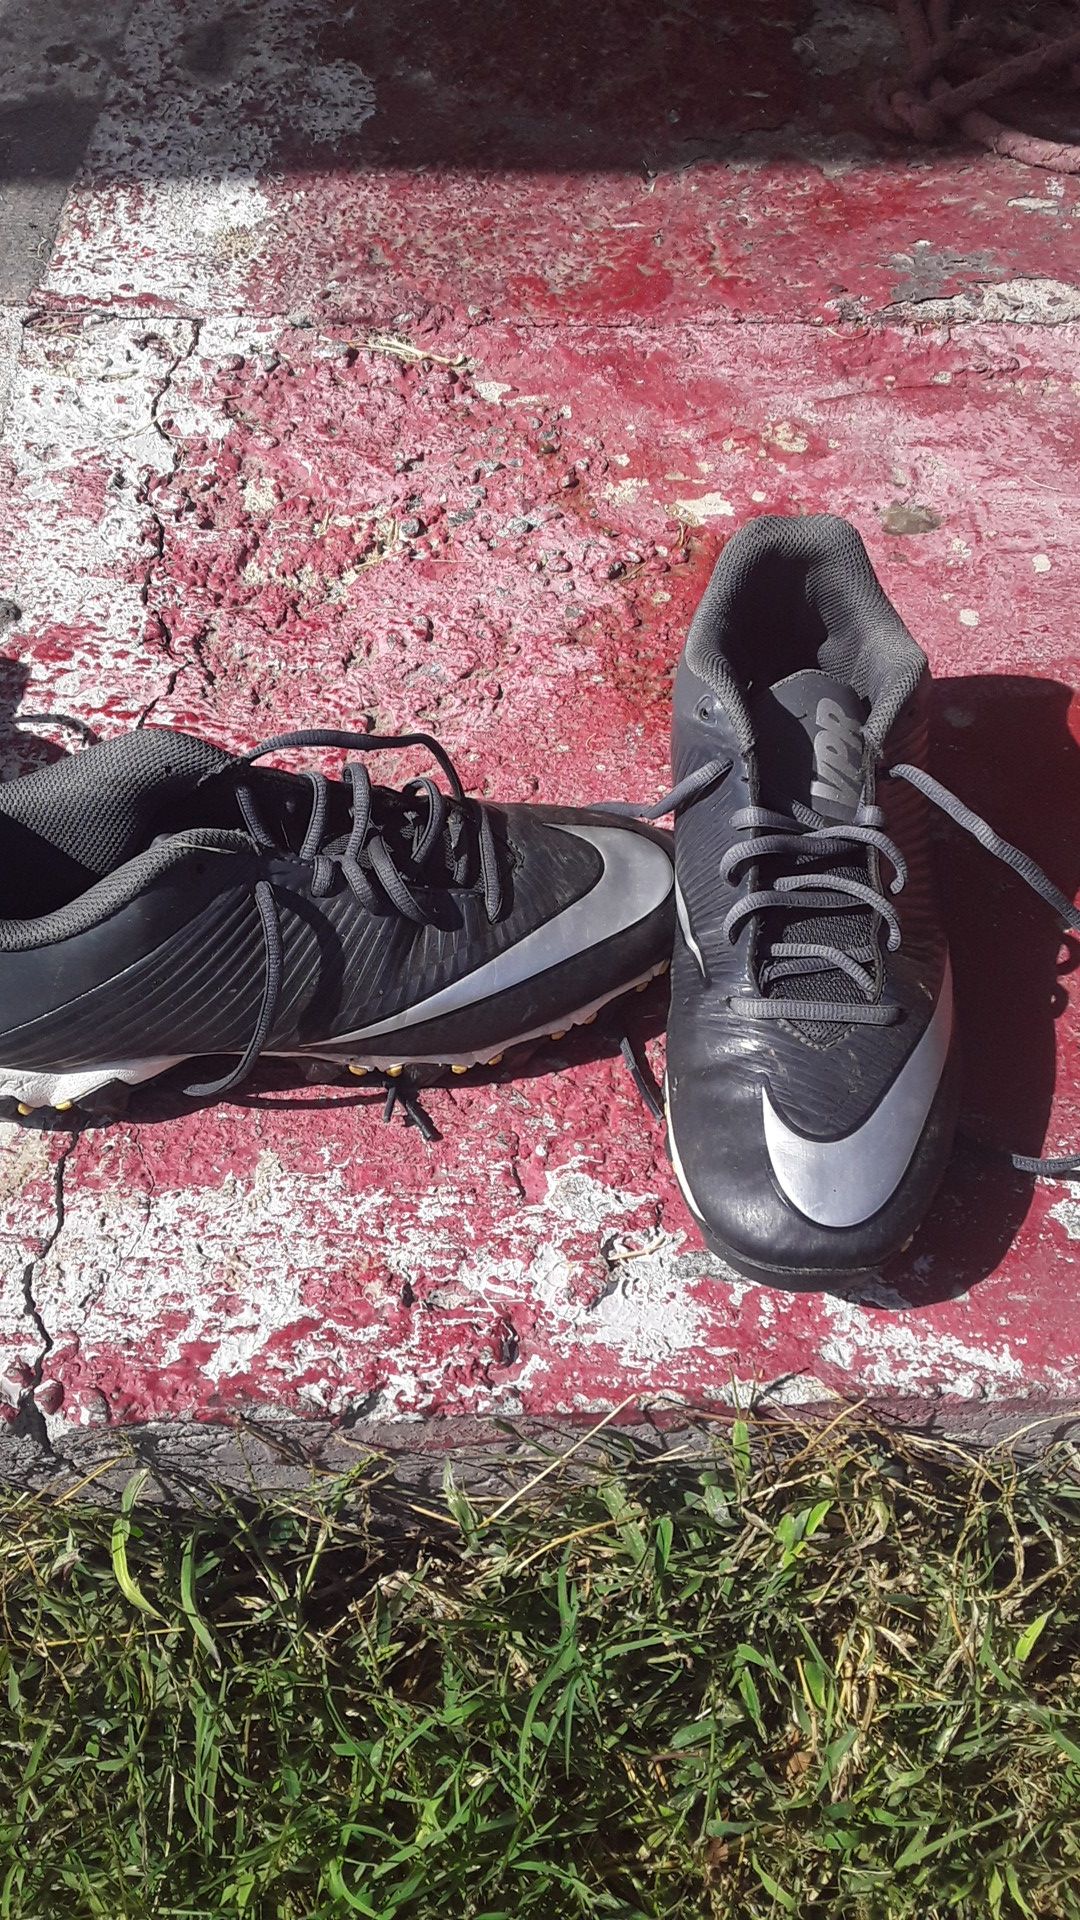 Football cleats 2 size 12 1 Nike size 8 1 Nike size 9 and 1/2